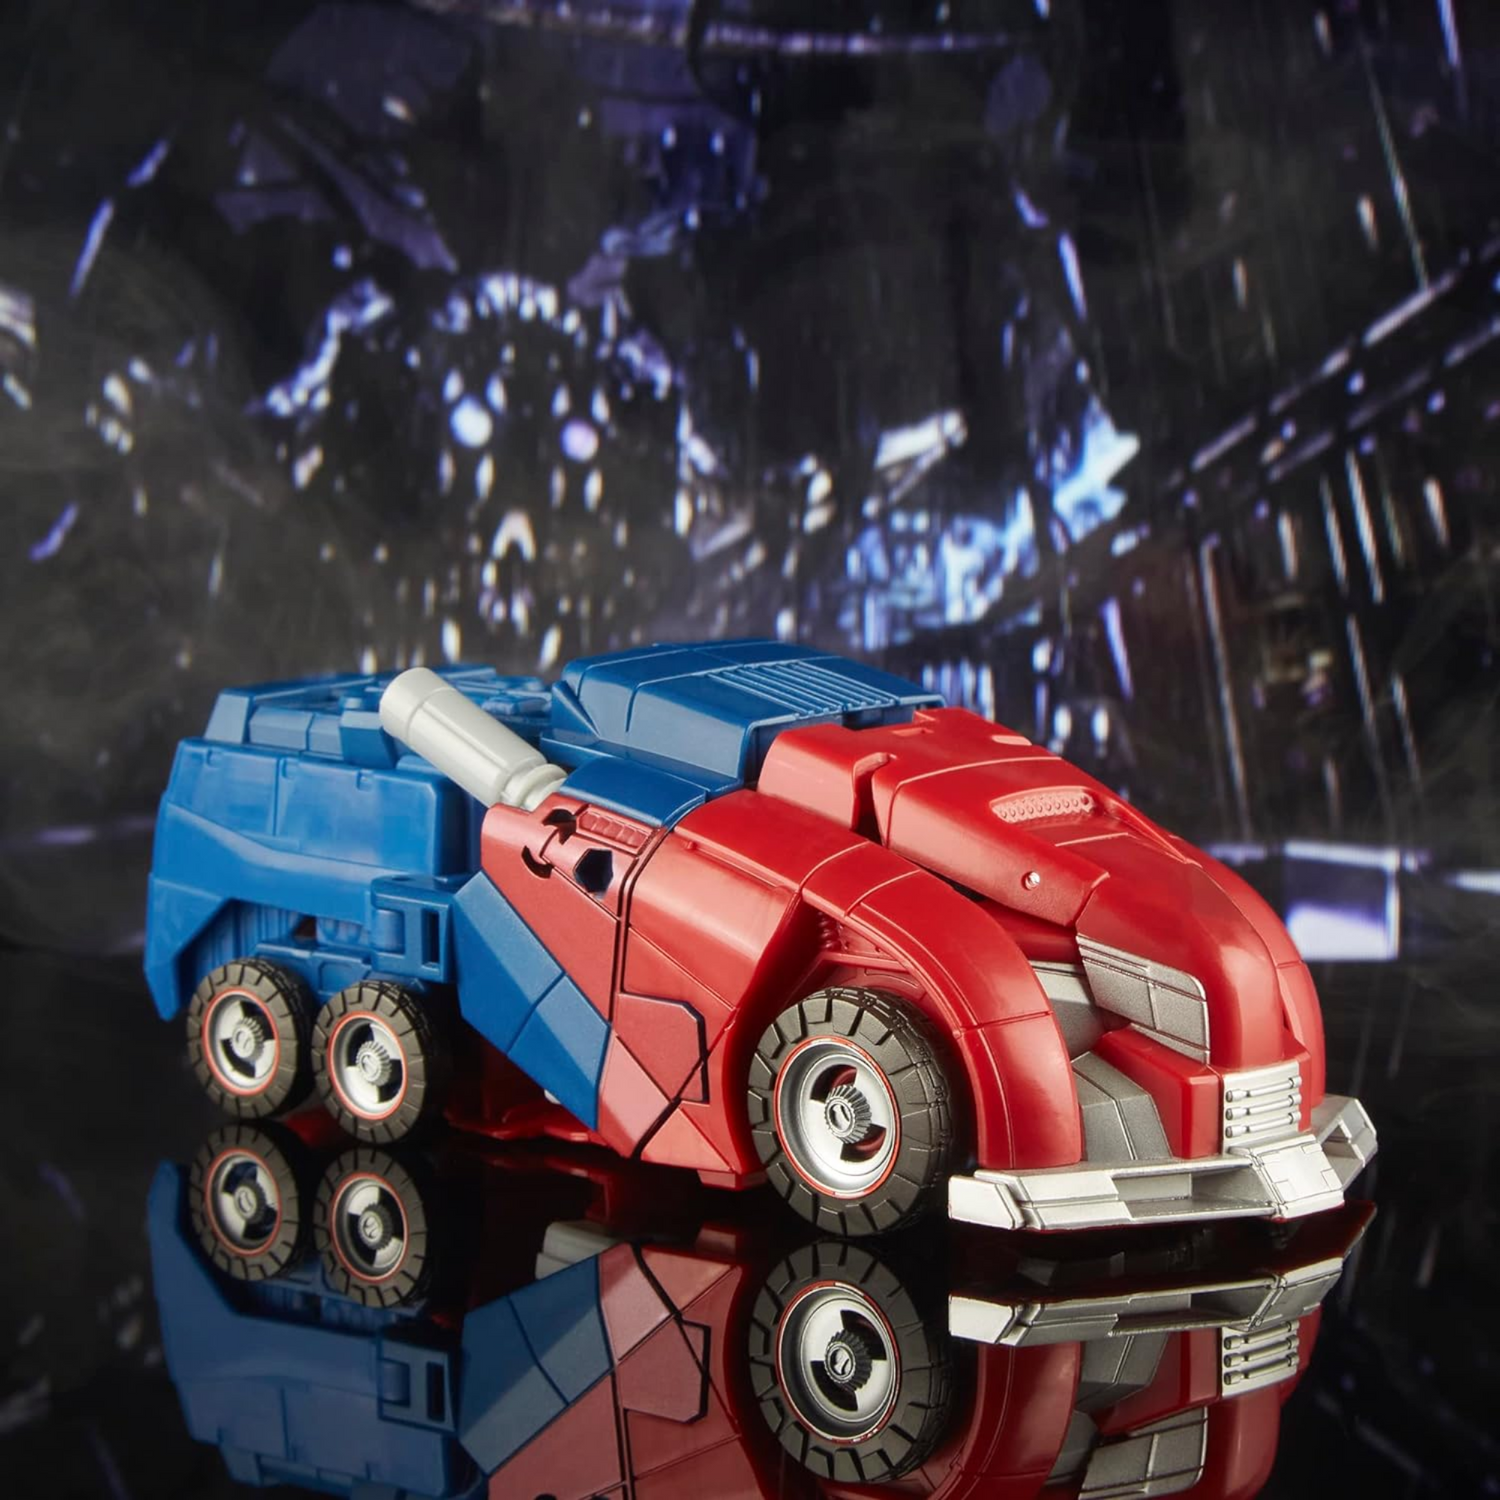 Transformers Toys Studio Series Voyager Class 03 Gamer Edition Optimus Prime Toy, 6.5-inch